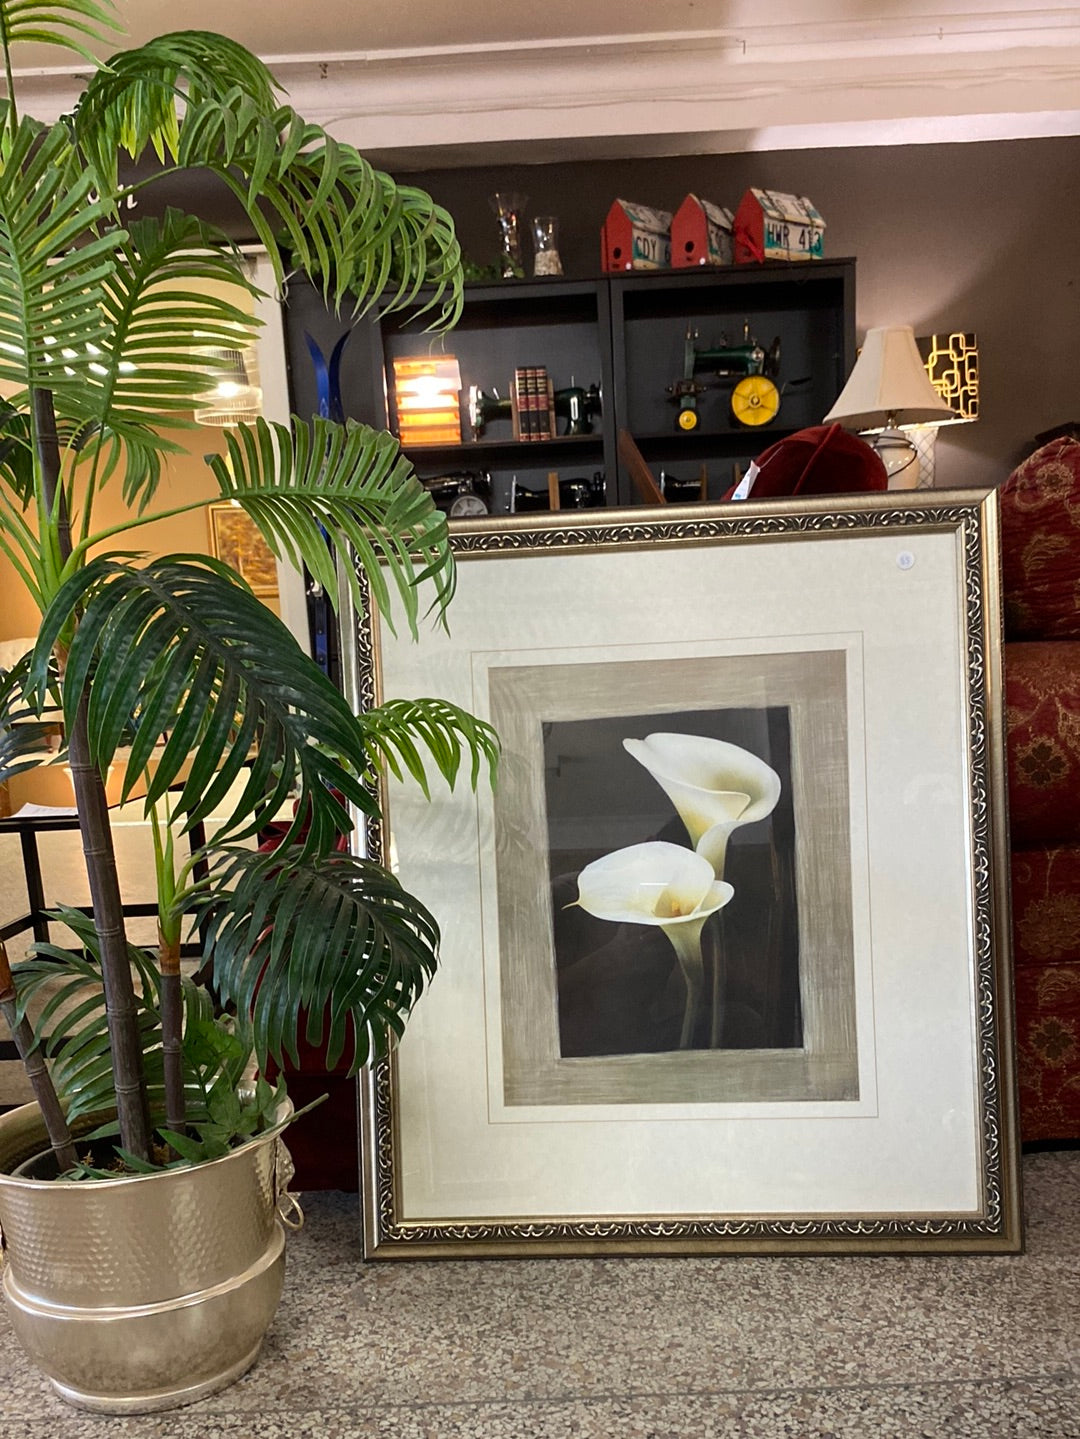 White calla lily picture in gold frame